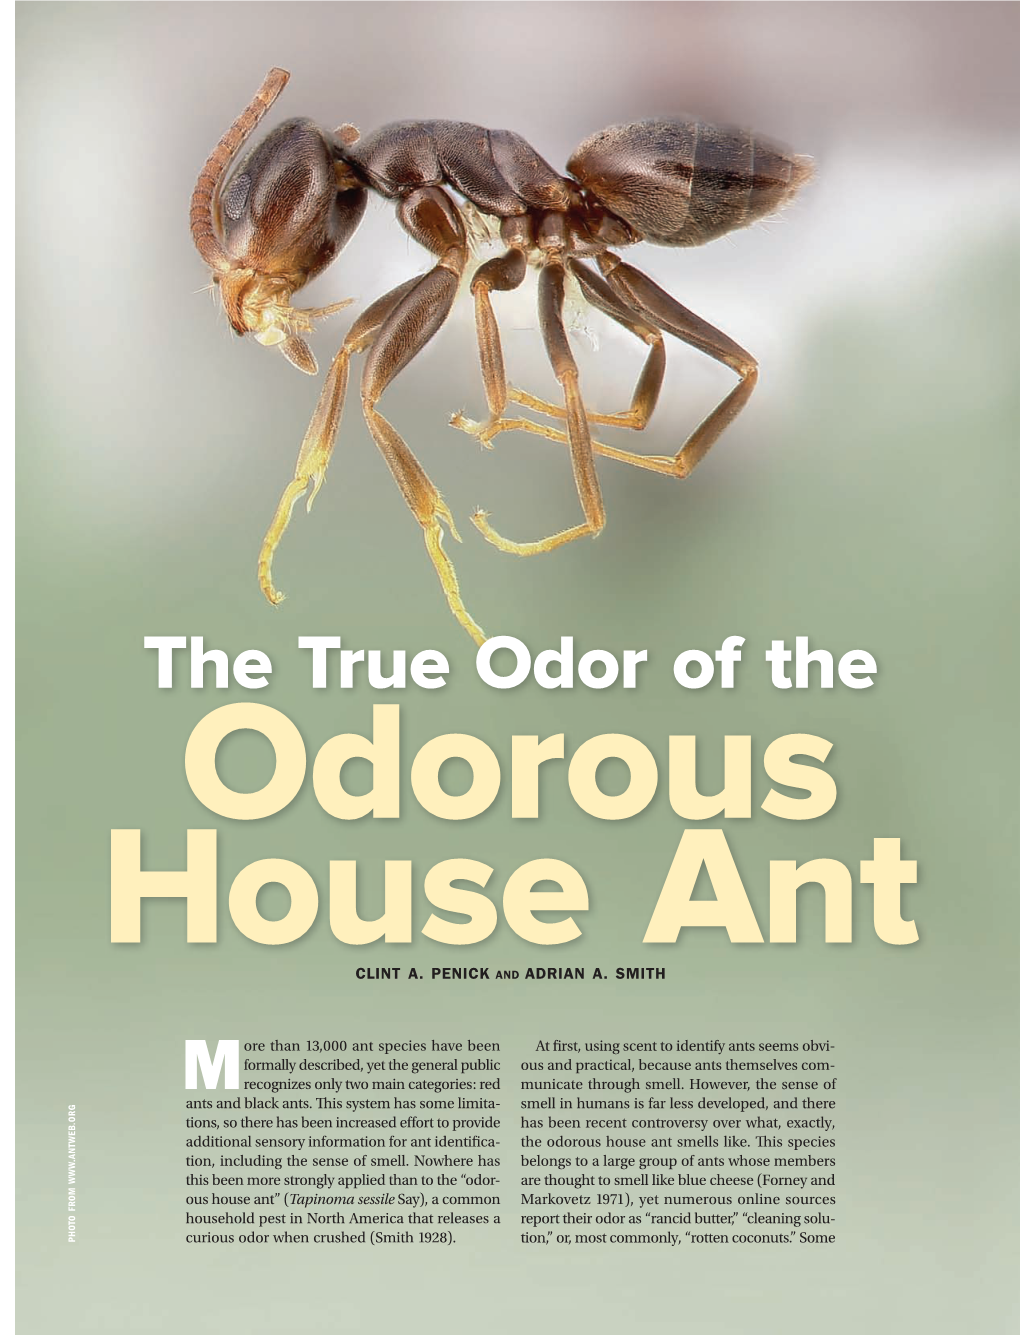 The True Odor of the Odorous House Ant CLINT A